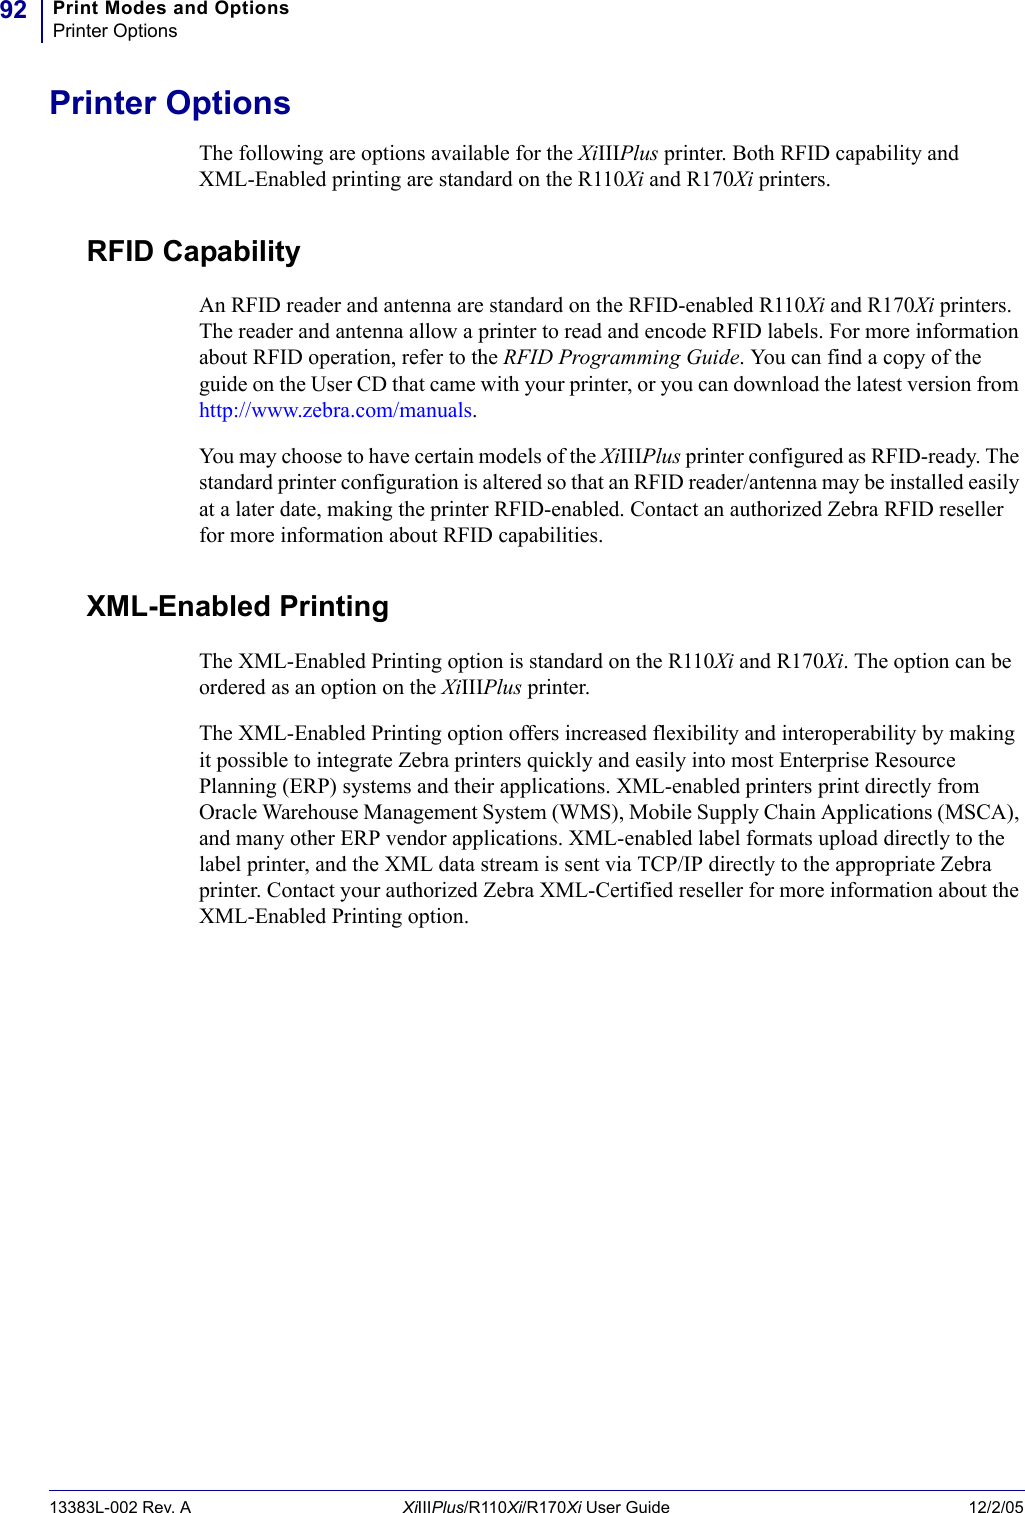 Print Modes and OptionsPrinter Options9213383L-002 Rev. A XiIIIPlus/R110Xi/R170Xi User Guide 12/2/05Printer OptionsThe following are options available for the XiIIIPlus printer. Both RFID capability and XML-Enabled printing are standard on the R110Xi and R170Xi printers.RFID CapabilityAn RFID reader and antenna are standard on the RFID-enabled R110Xi and R170Xi printers. The reader and antenna allow a printer to read and encode RFID labels. For more information about RFID operation, refer to the RFID Programming Guide. You can find a copy of the guide on the User CD that came with your printer, or you can download the latest version from http://www.zebra.com/manuals.You may choose to have certain models of the XiIIIPlus printer configured as RFID-ready. The standard printer configuration is altered so that an RFID reader/antenna may be installed easily at a later date, making the printer RFID-enabled. Contact an authorized Zebra RFID reseller for more information about RFID capabilities.XML-Enabled PrintingThe XML-Enabled Printing option is standard on the R110Xi and R170Xi. The option can be ordered as an option on the XiIIIPlus printer.The XML-Enabled Printing option offers increased flexibility and interoperability by making it possible to integrate Zebra printers quickly and easily into most Enterprise Resource Planning (ERP) systems and their applications. XML-enabled printers print directly from Oracle Warehouse Management System (WMS), Mobile Supply Chain Applications (MSCA), and many other ERP vendor applications. XML-enabled label formats upload directly to the label printer, and the XML data stream is sent via TCP/IP directly to the appropriate Zebra printer. Contact your authorized Zebra XML-Certified reseller for more information about the XML-Enabled Printing option. 